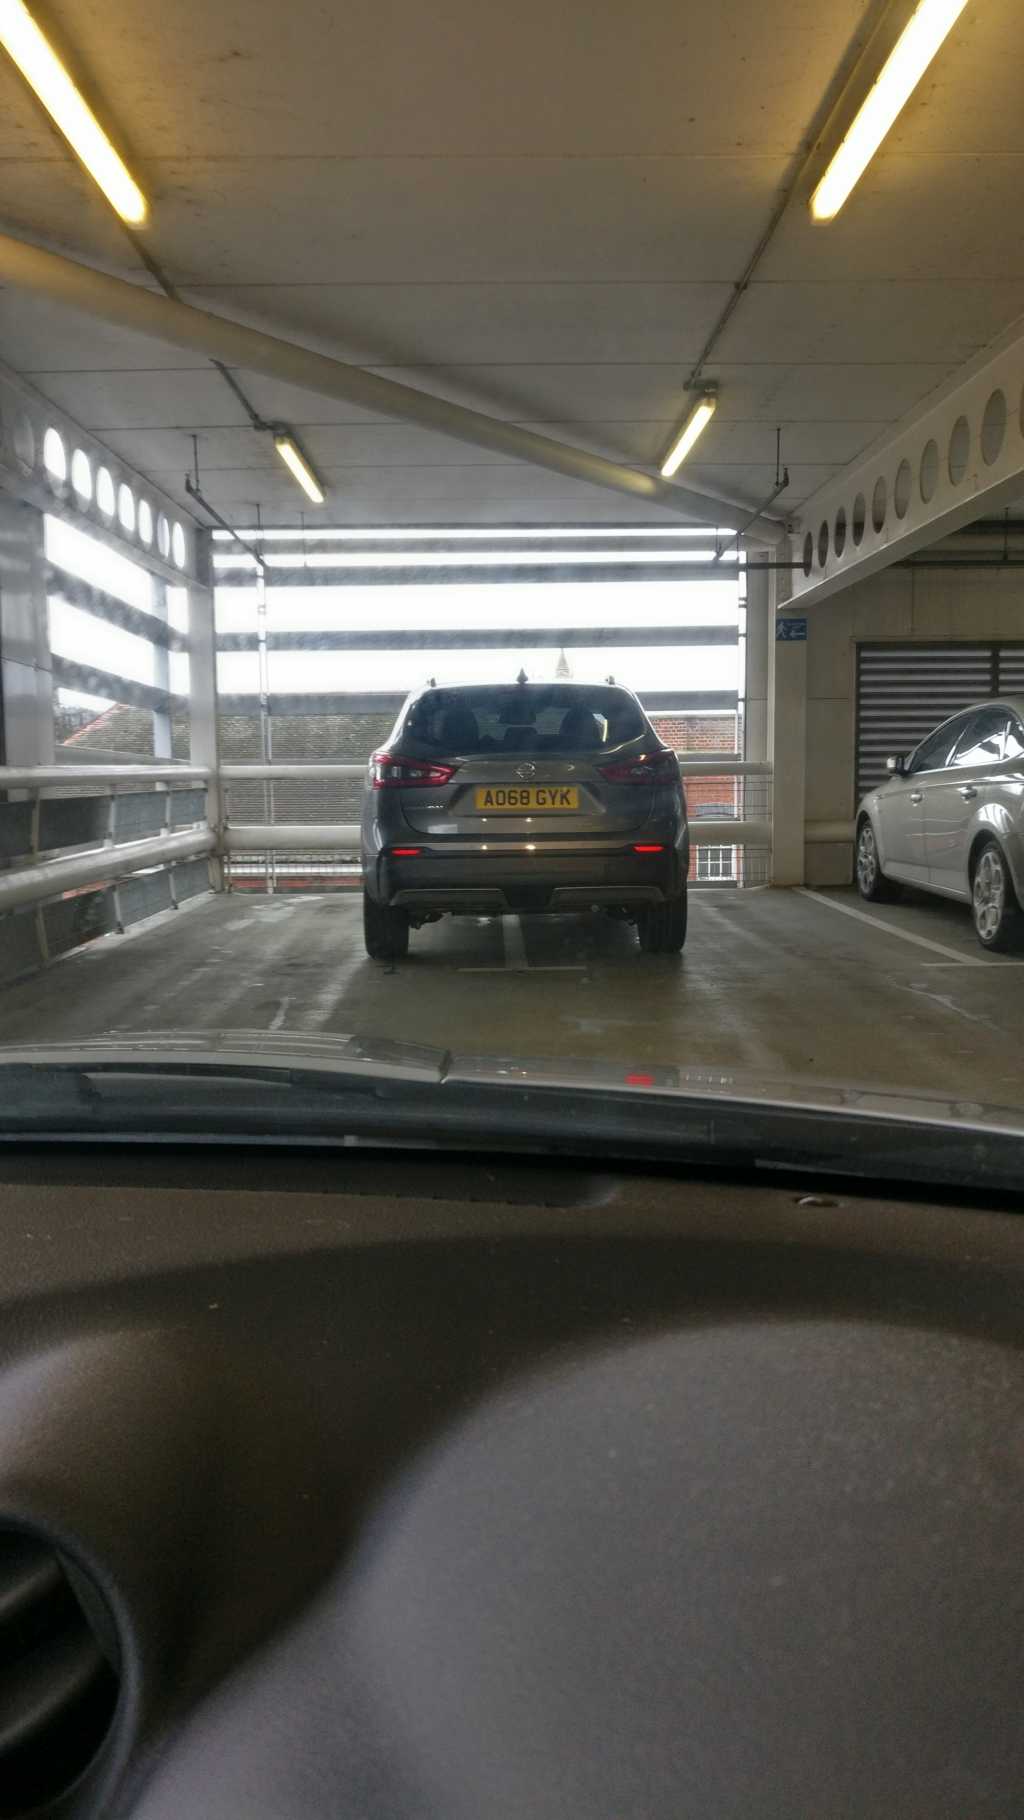 WHEN A CAR PARK IS LISTED FULL AND YOU TAKE TWO SPACES displaying Selfish Parking